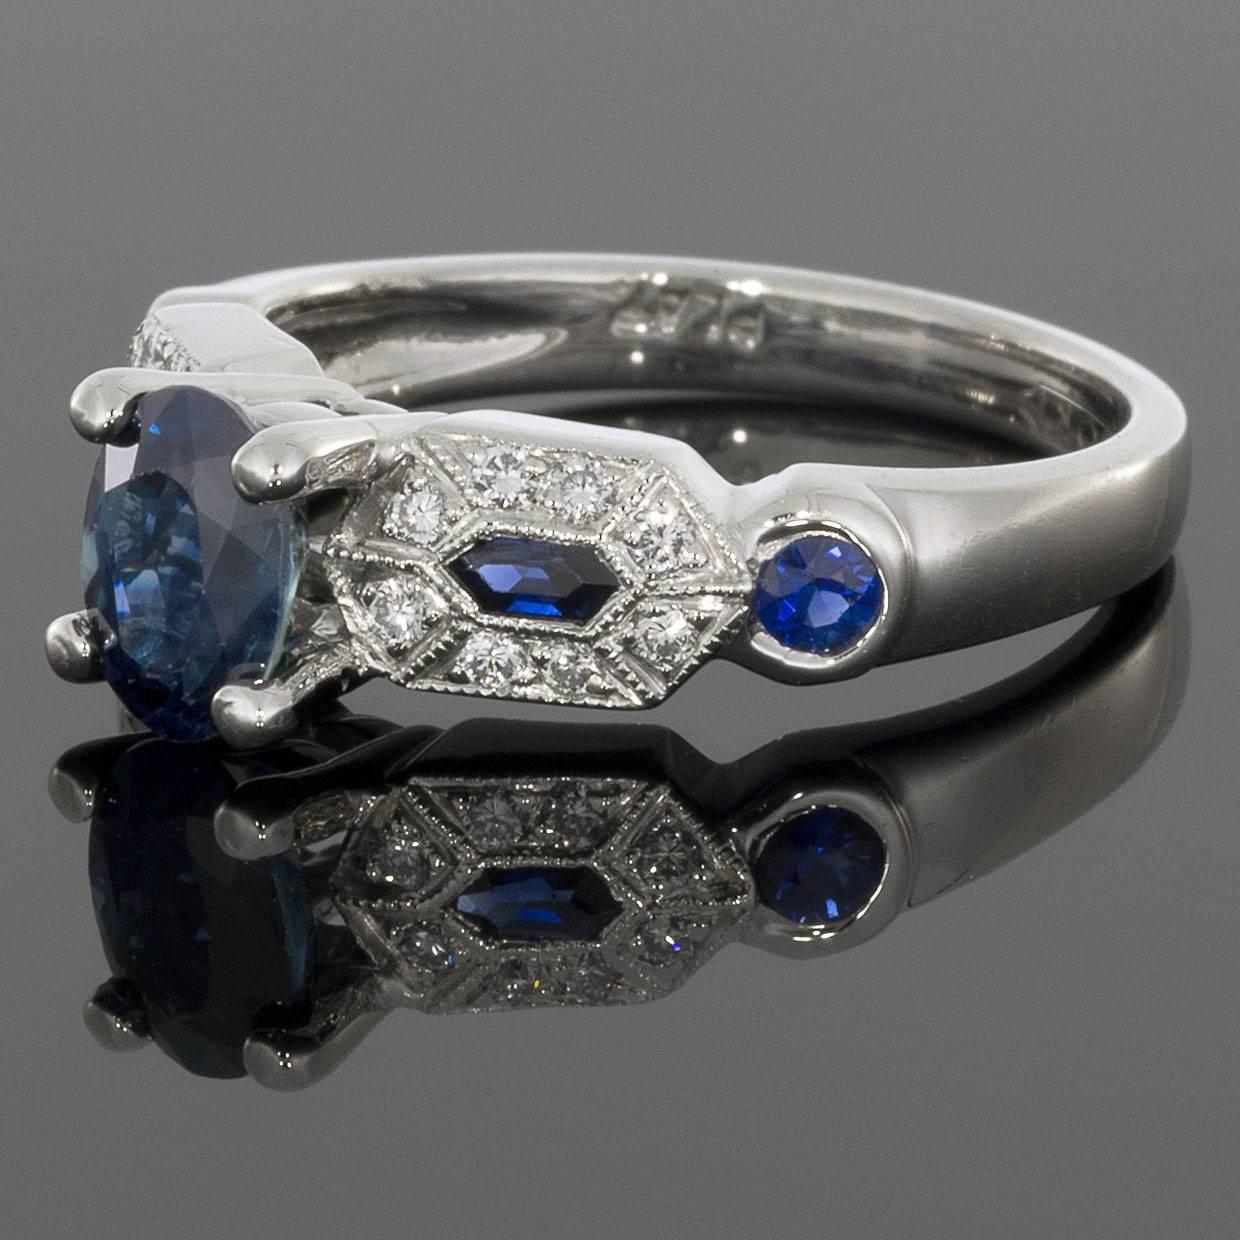 This amazing ring features a unique & beautiful combination of natural blue sapphires & sparkly white diamonds. The center of the ring is set with an oval sapphire weighing 1.11CTW. Pave diamonds and sapphires set in an Art Deco design flank either